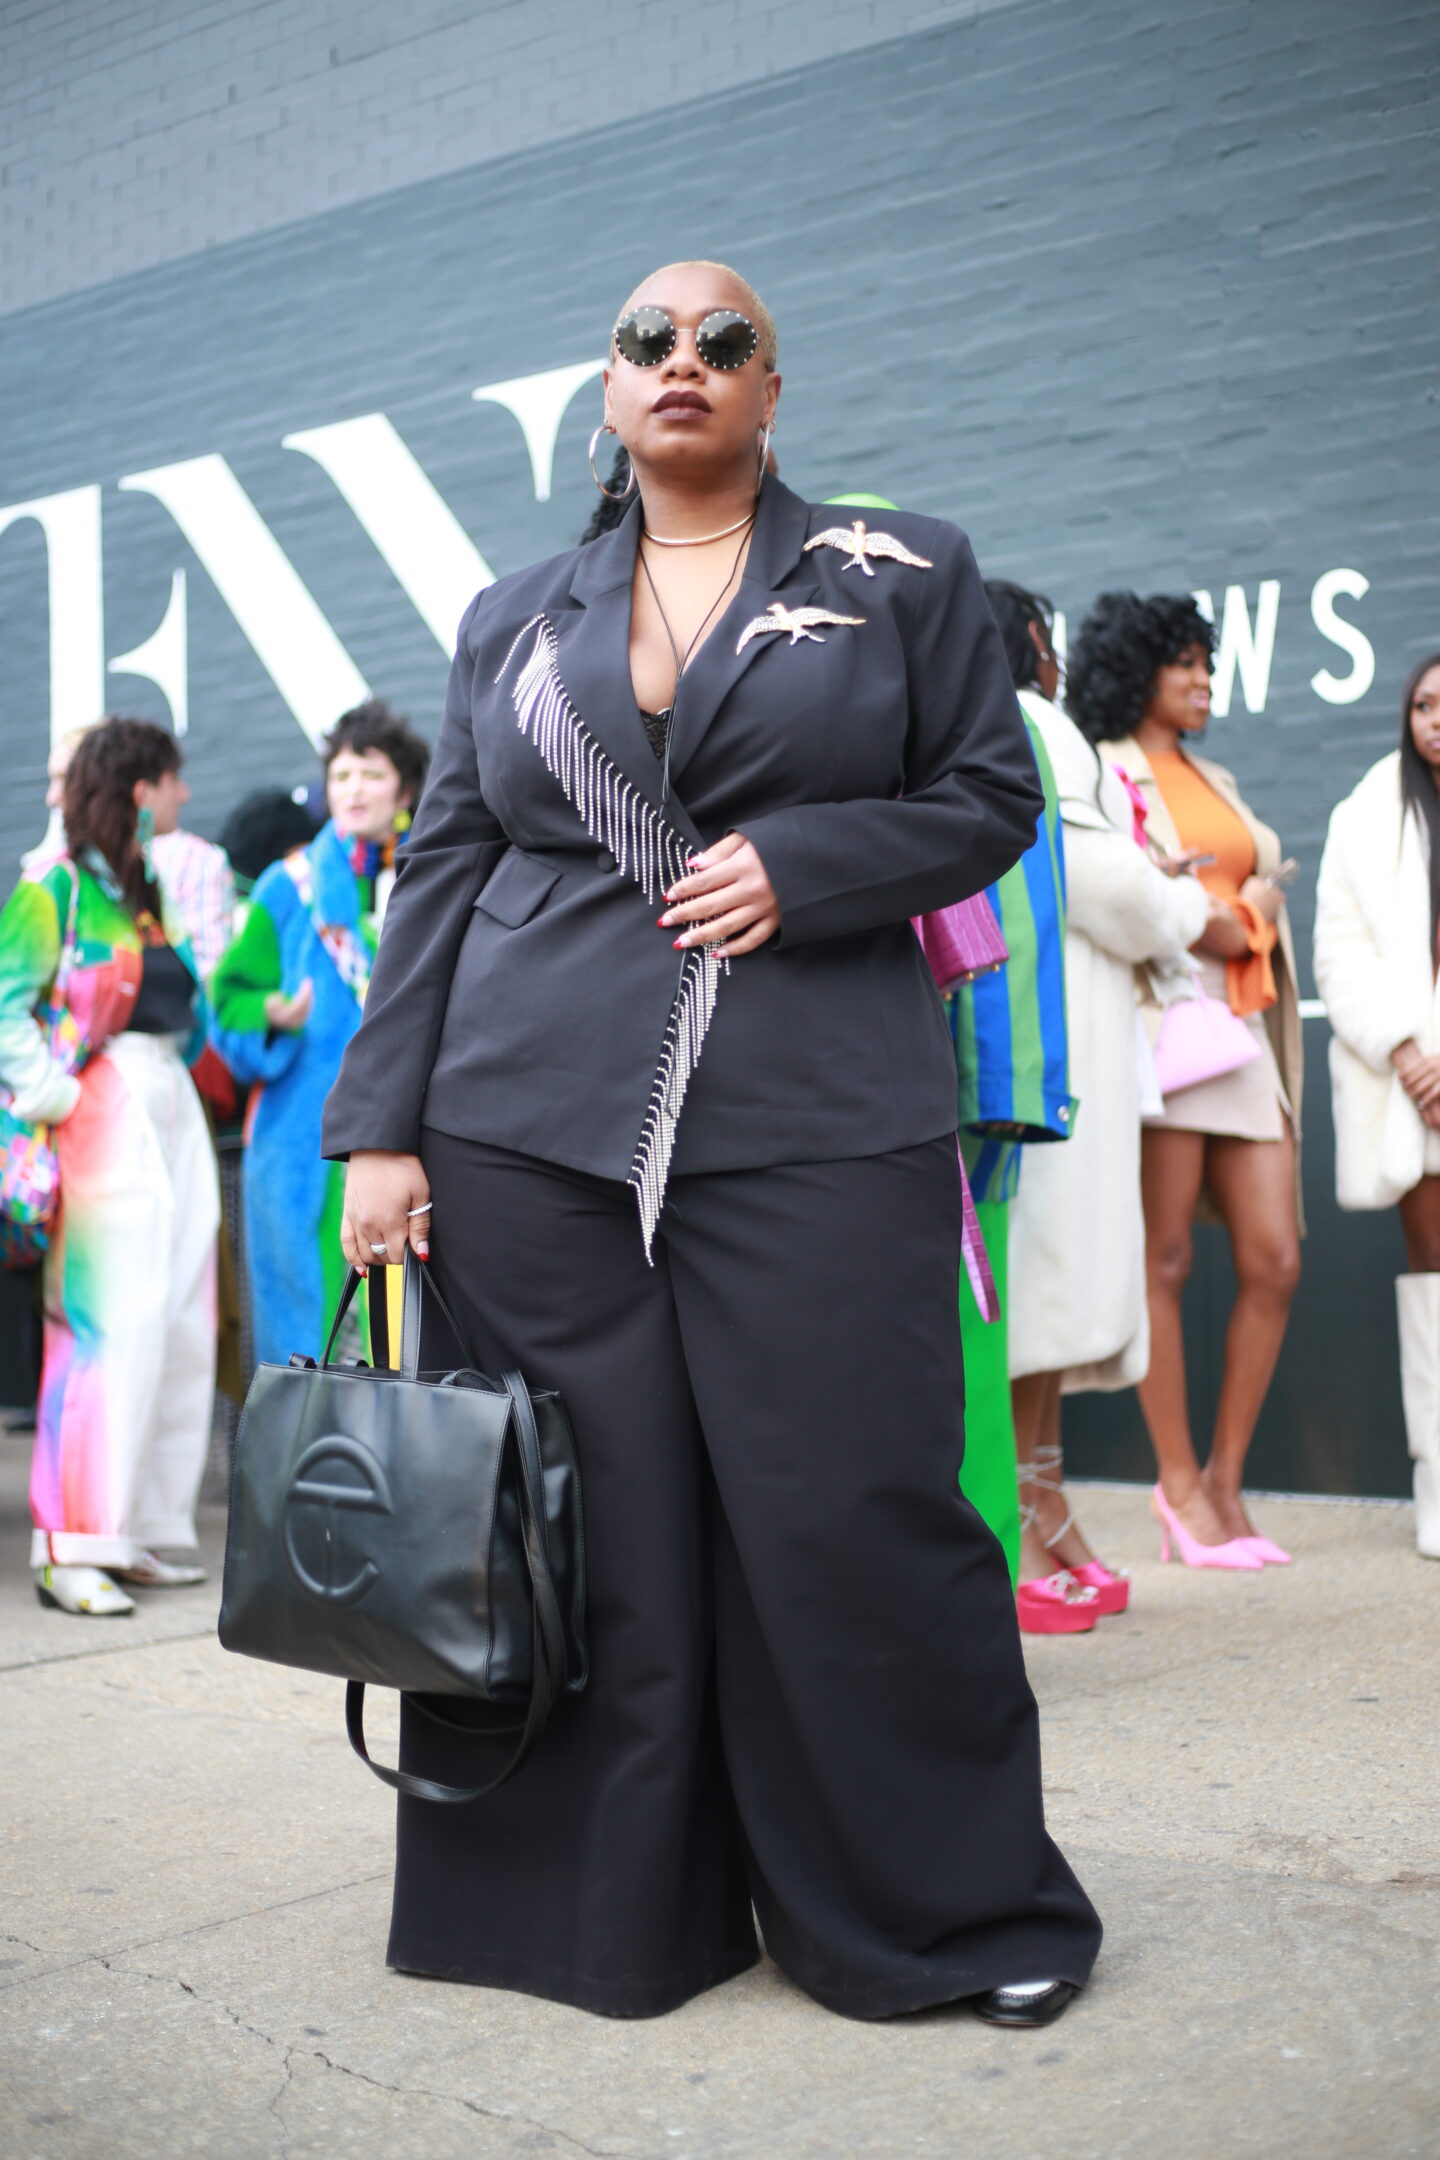 Kelly augustine in a black blazer with fringe detail.

 plus size street style outfits at new york fashion week

Photo credit: Tip.Raw